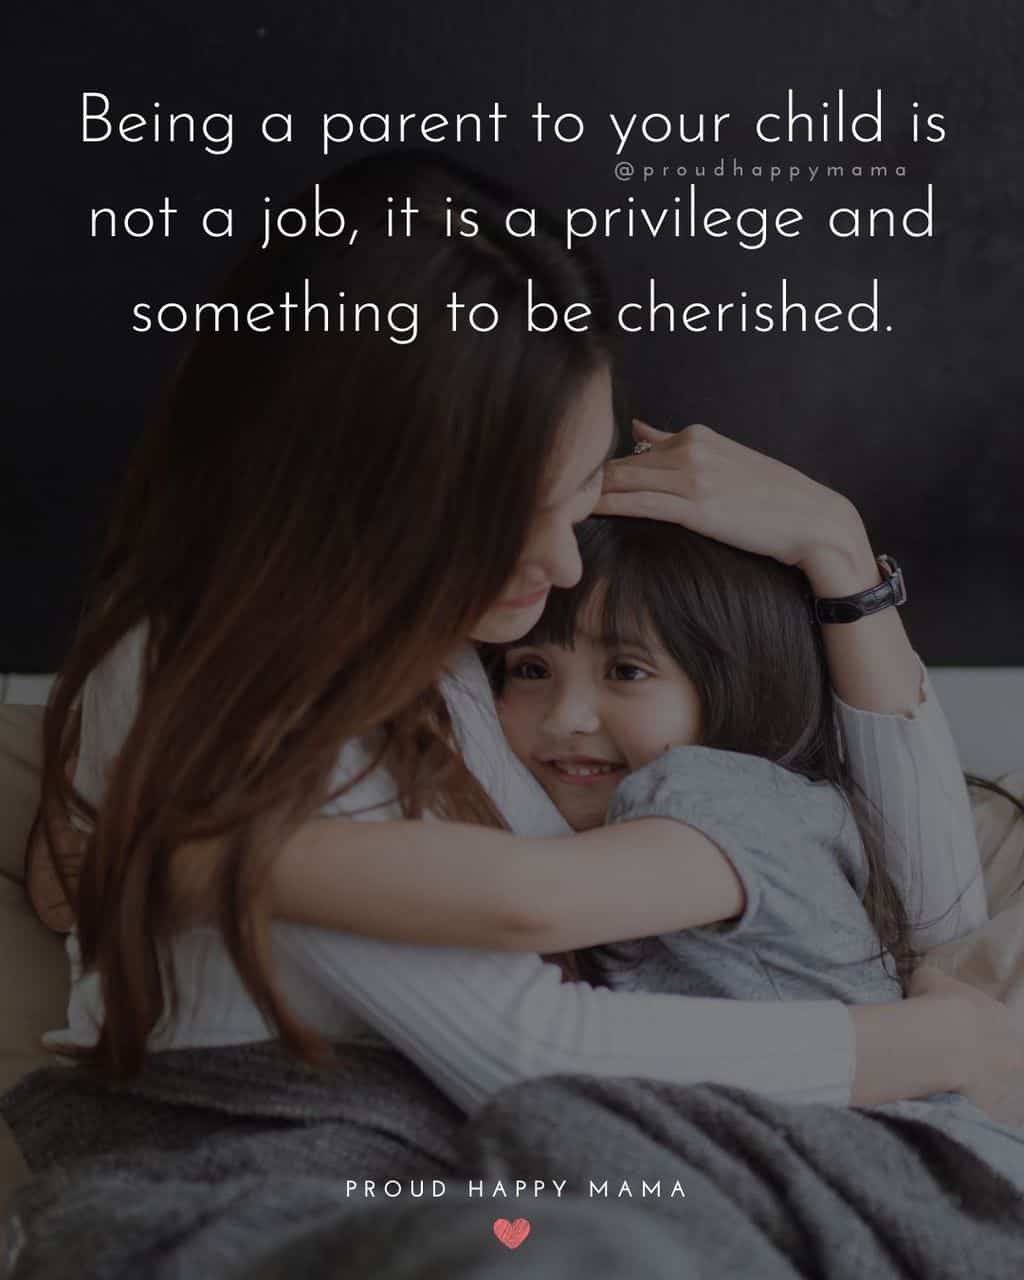 Parenting Quotes - Being a parent to your child is not a job, it is a privilege and something to be cherished.’